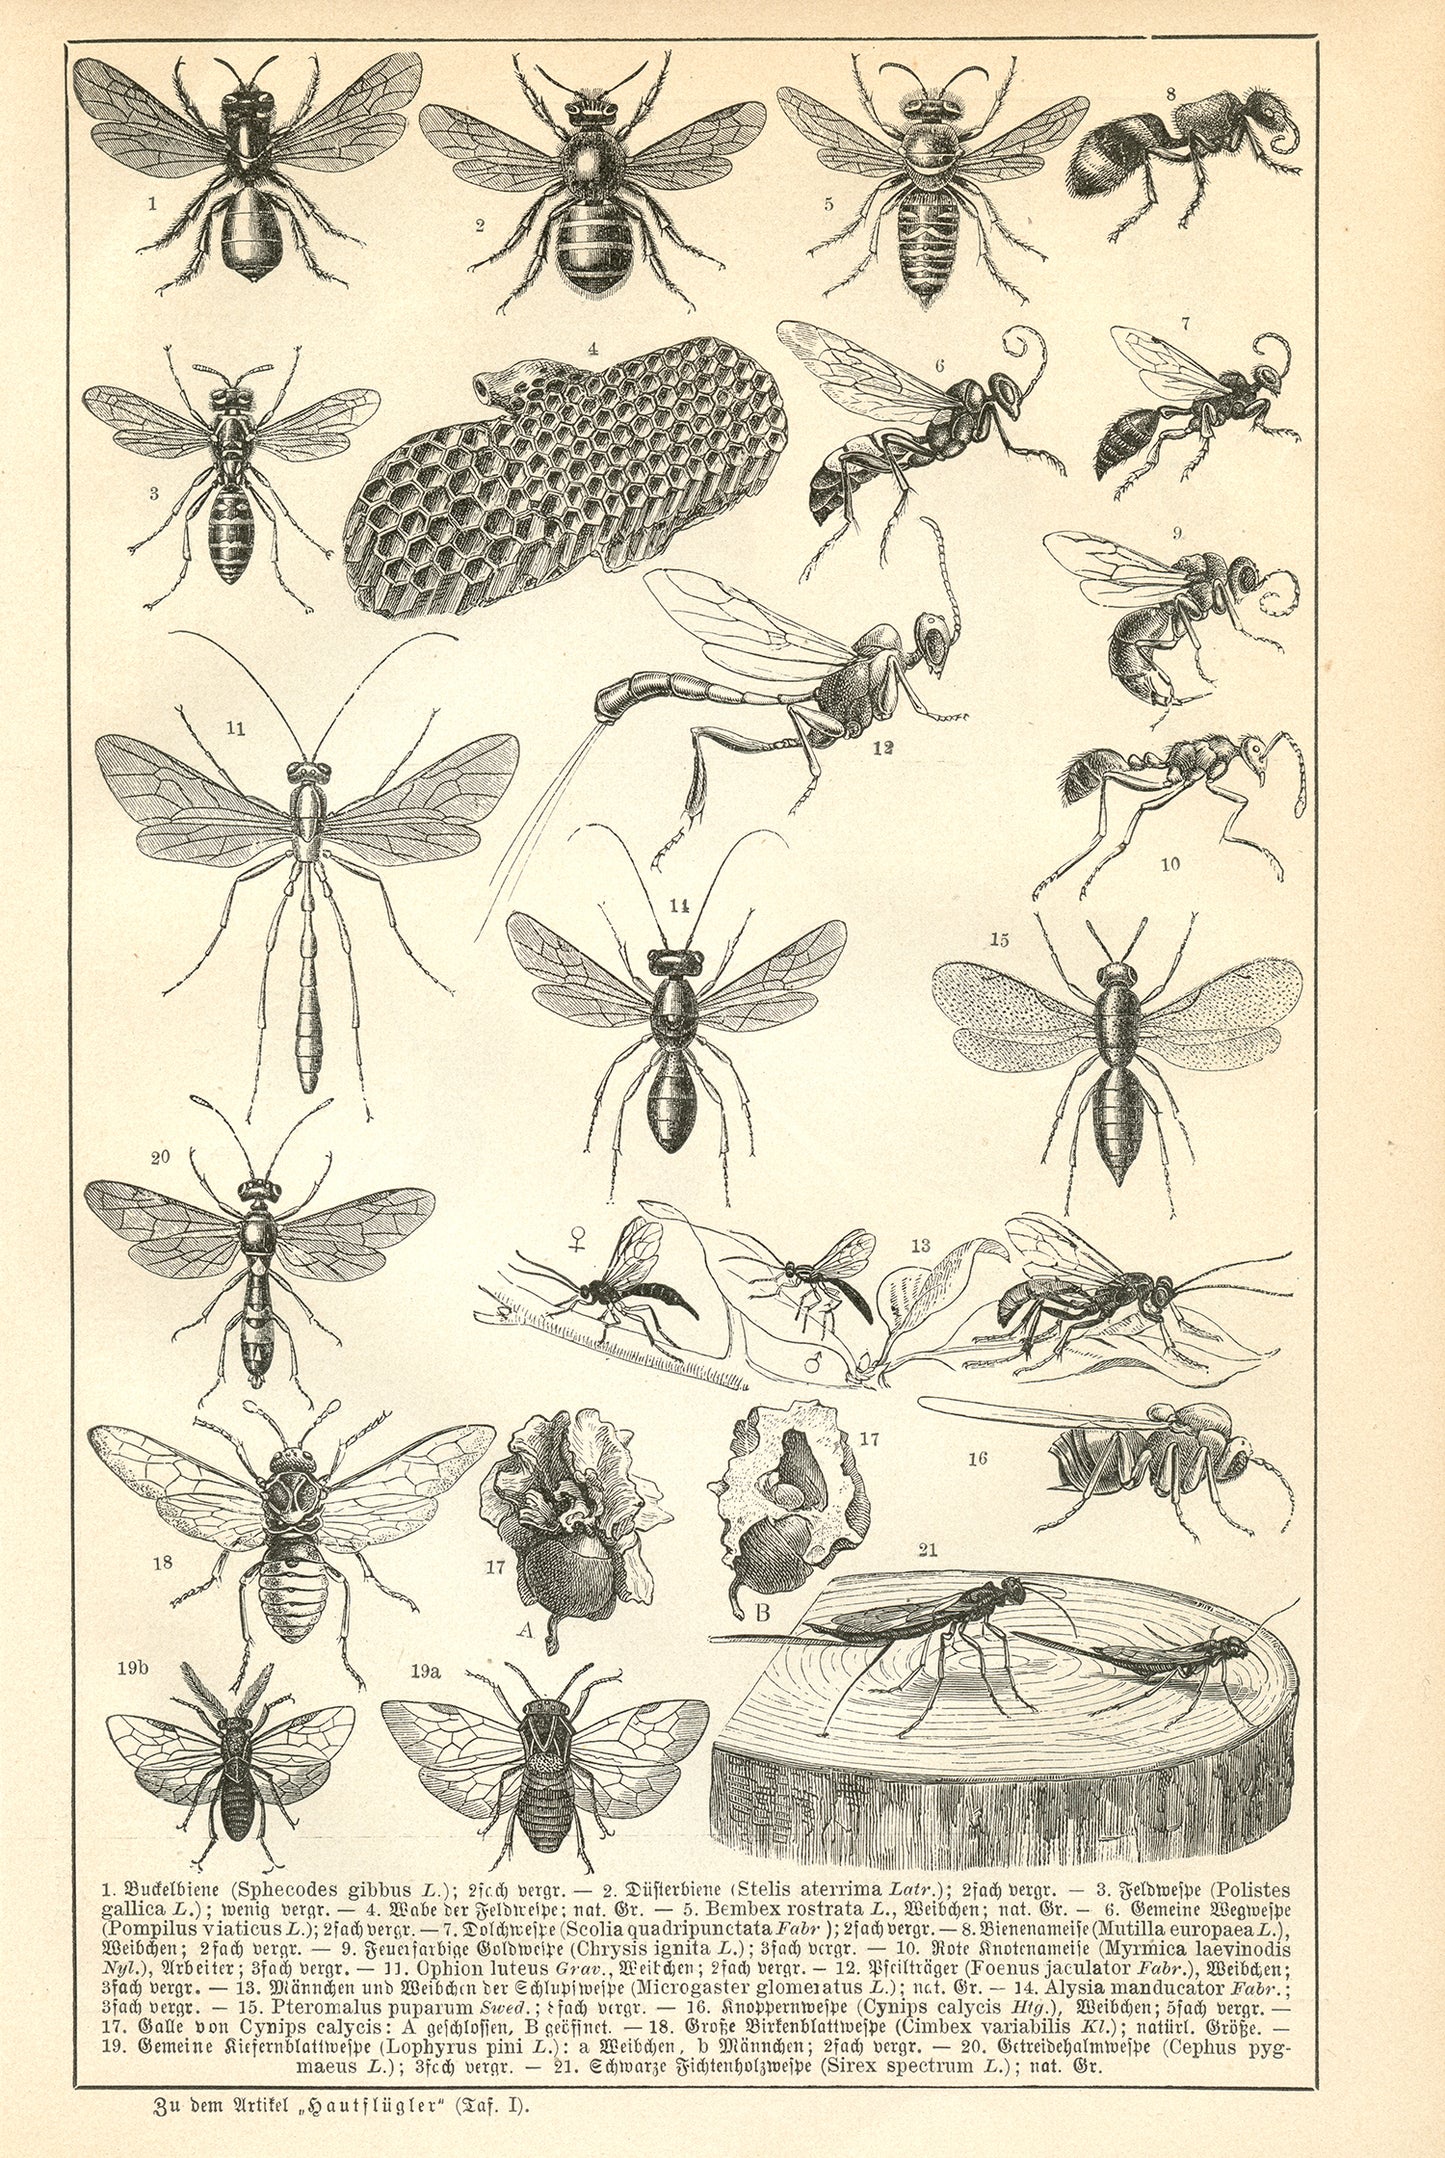 1889 Antique German Ants Engraving + Flying Insects